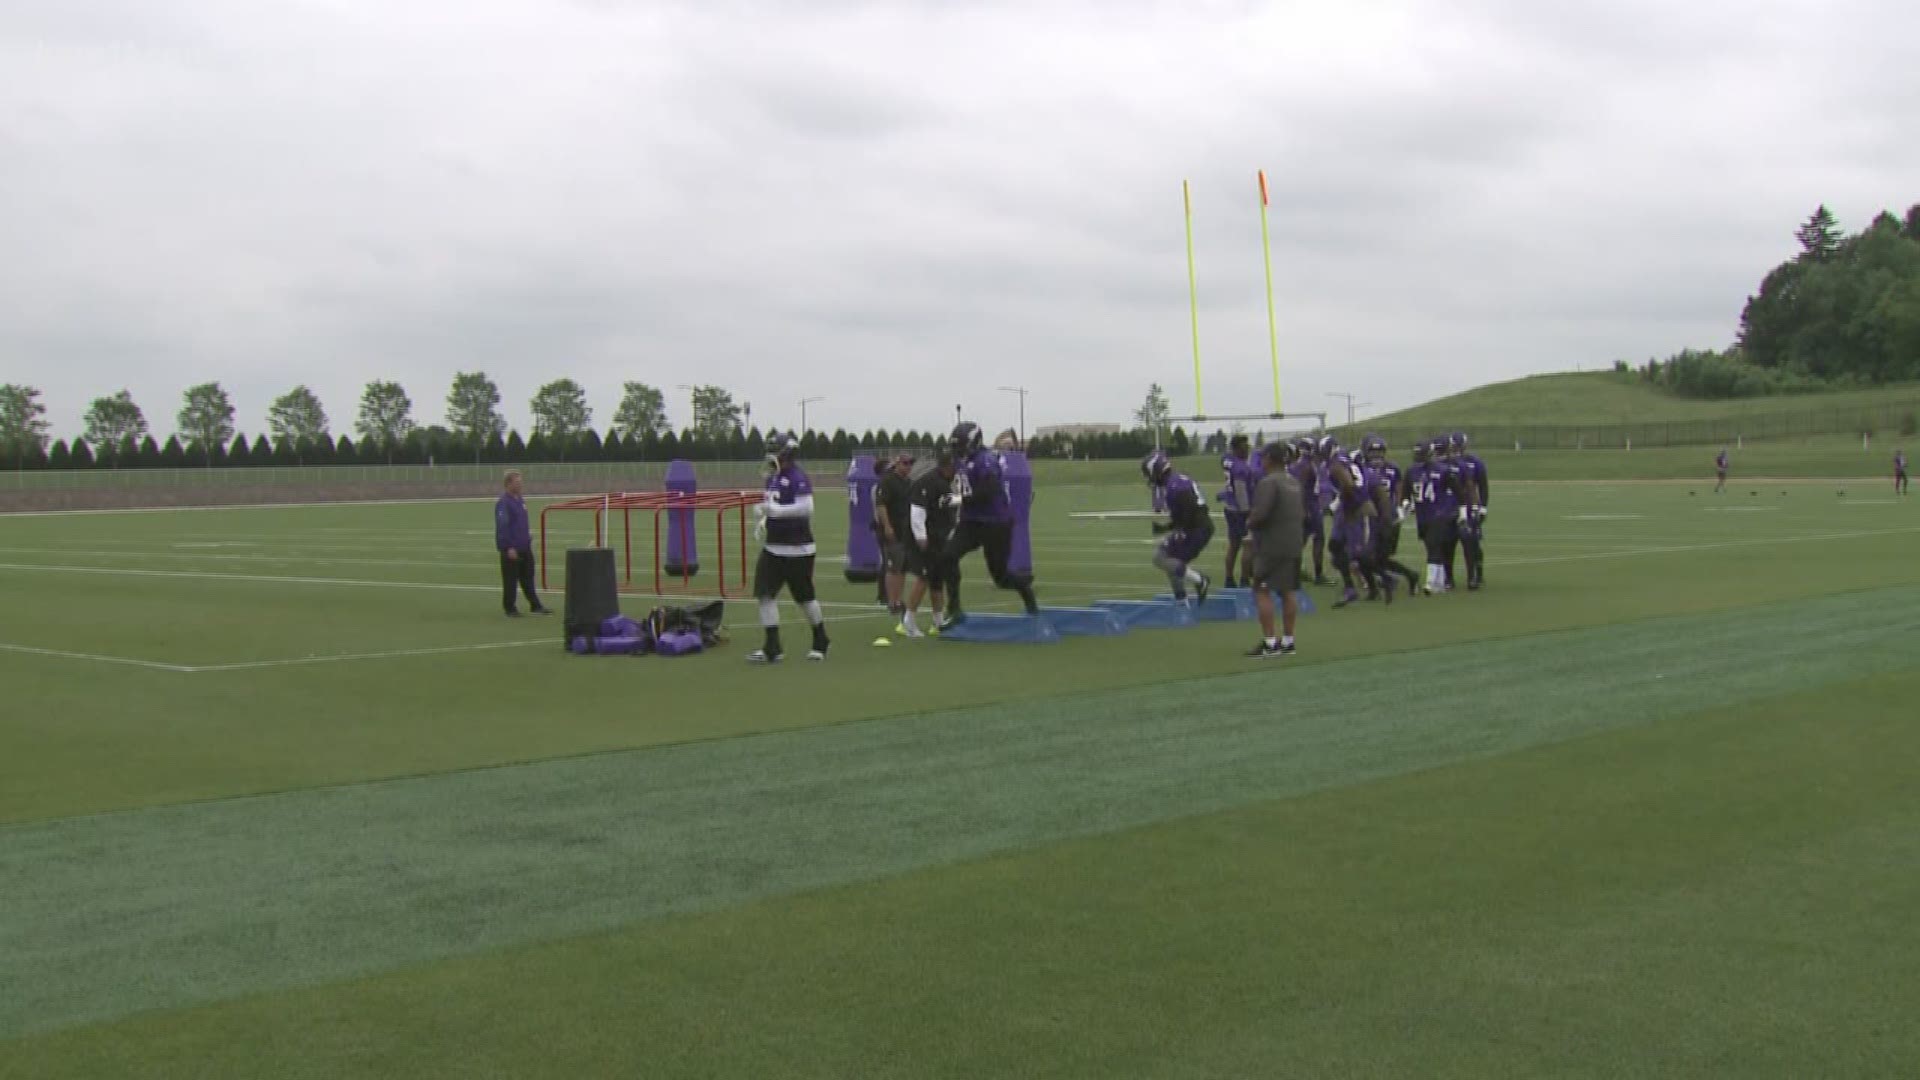 The Vikings will be kicking off their first training camp in the Twin Cities next month -- and now, we're getting more details about the team's inaugural event. https://kare11.tv/2LZVPAw